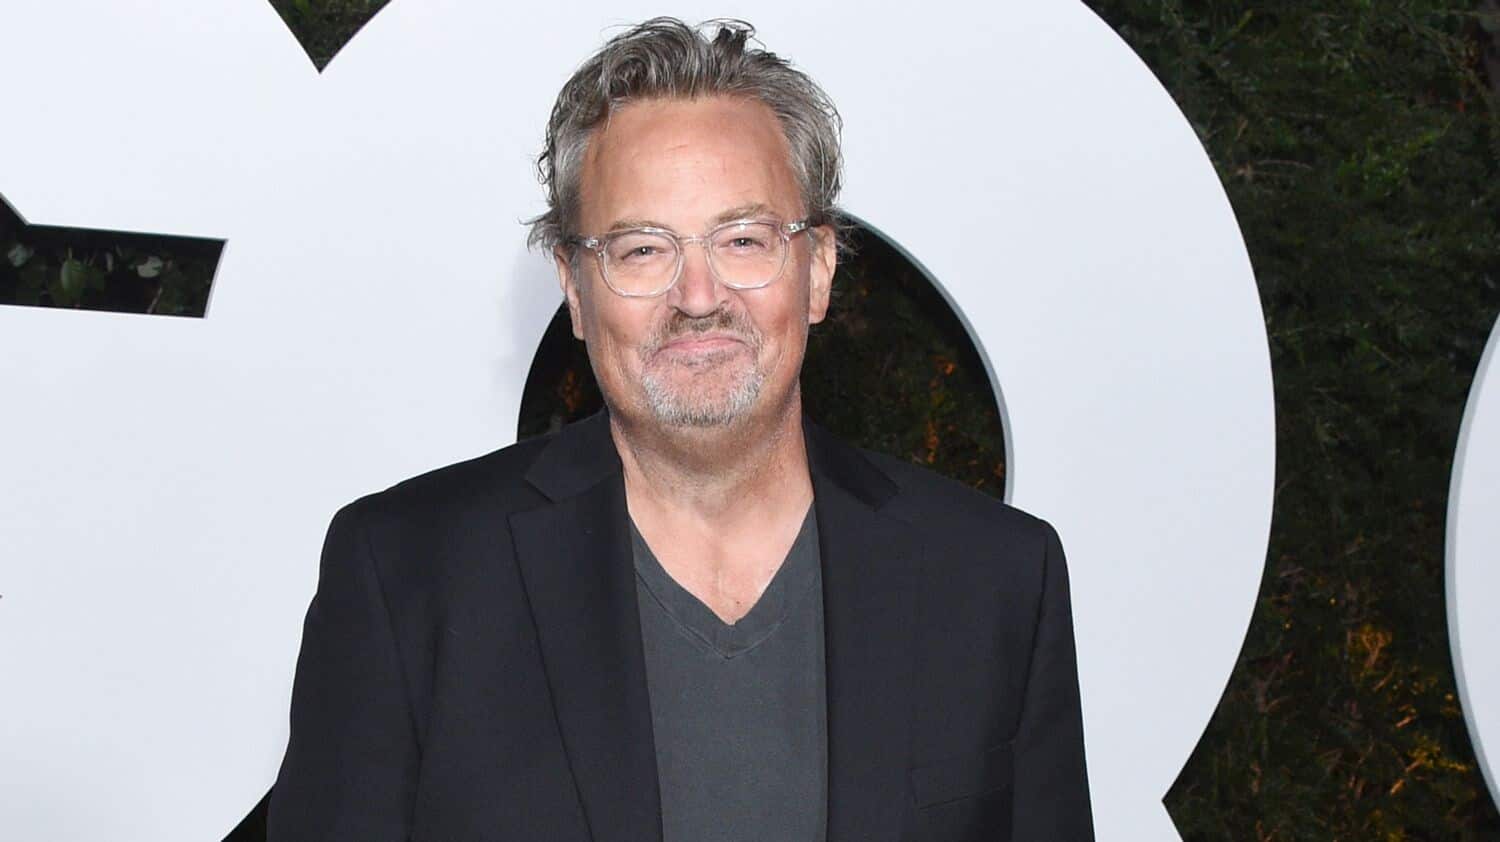 Matthew Perry's personal bank account balance revealed